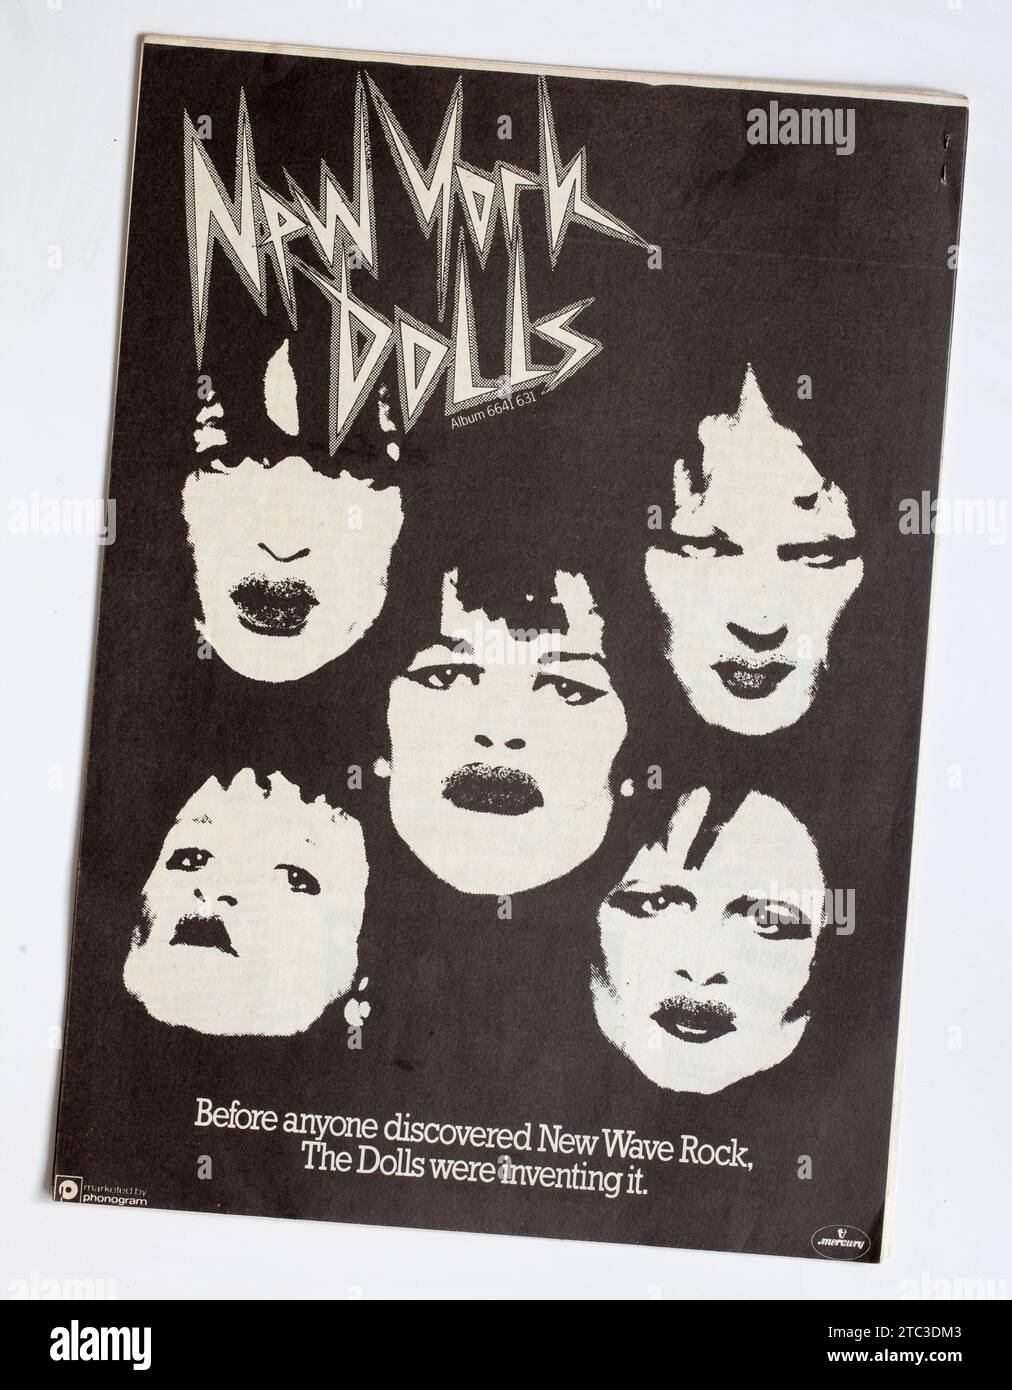 Advert for the New York Dolls on the back cover1970s Sniffin Glue Punk Rock Fanzine Magazine Stock Photo